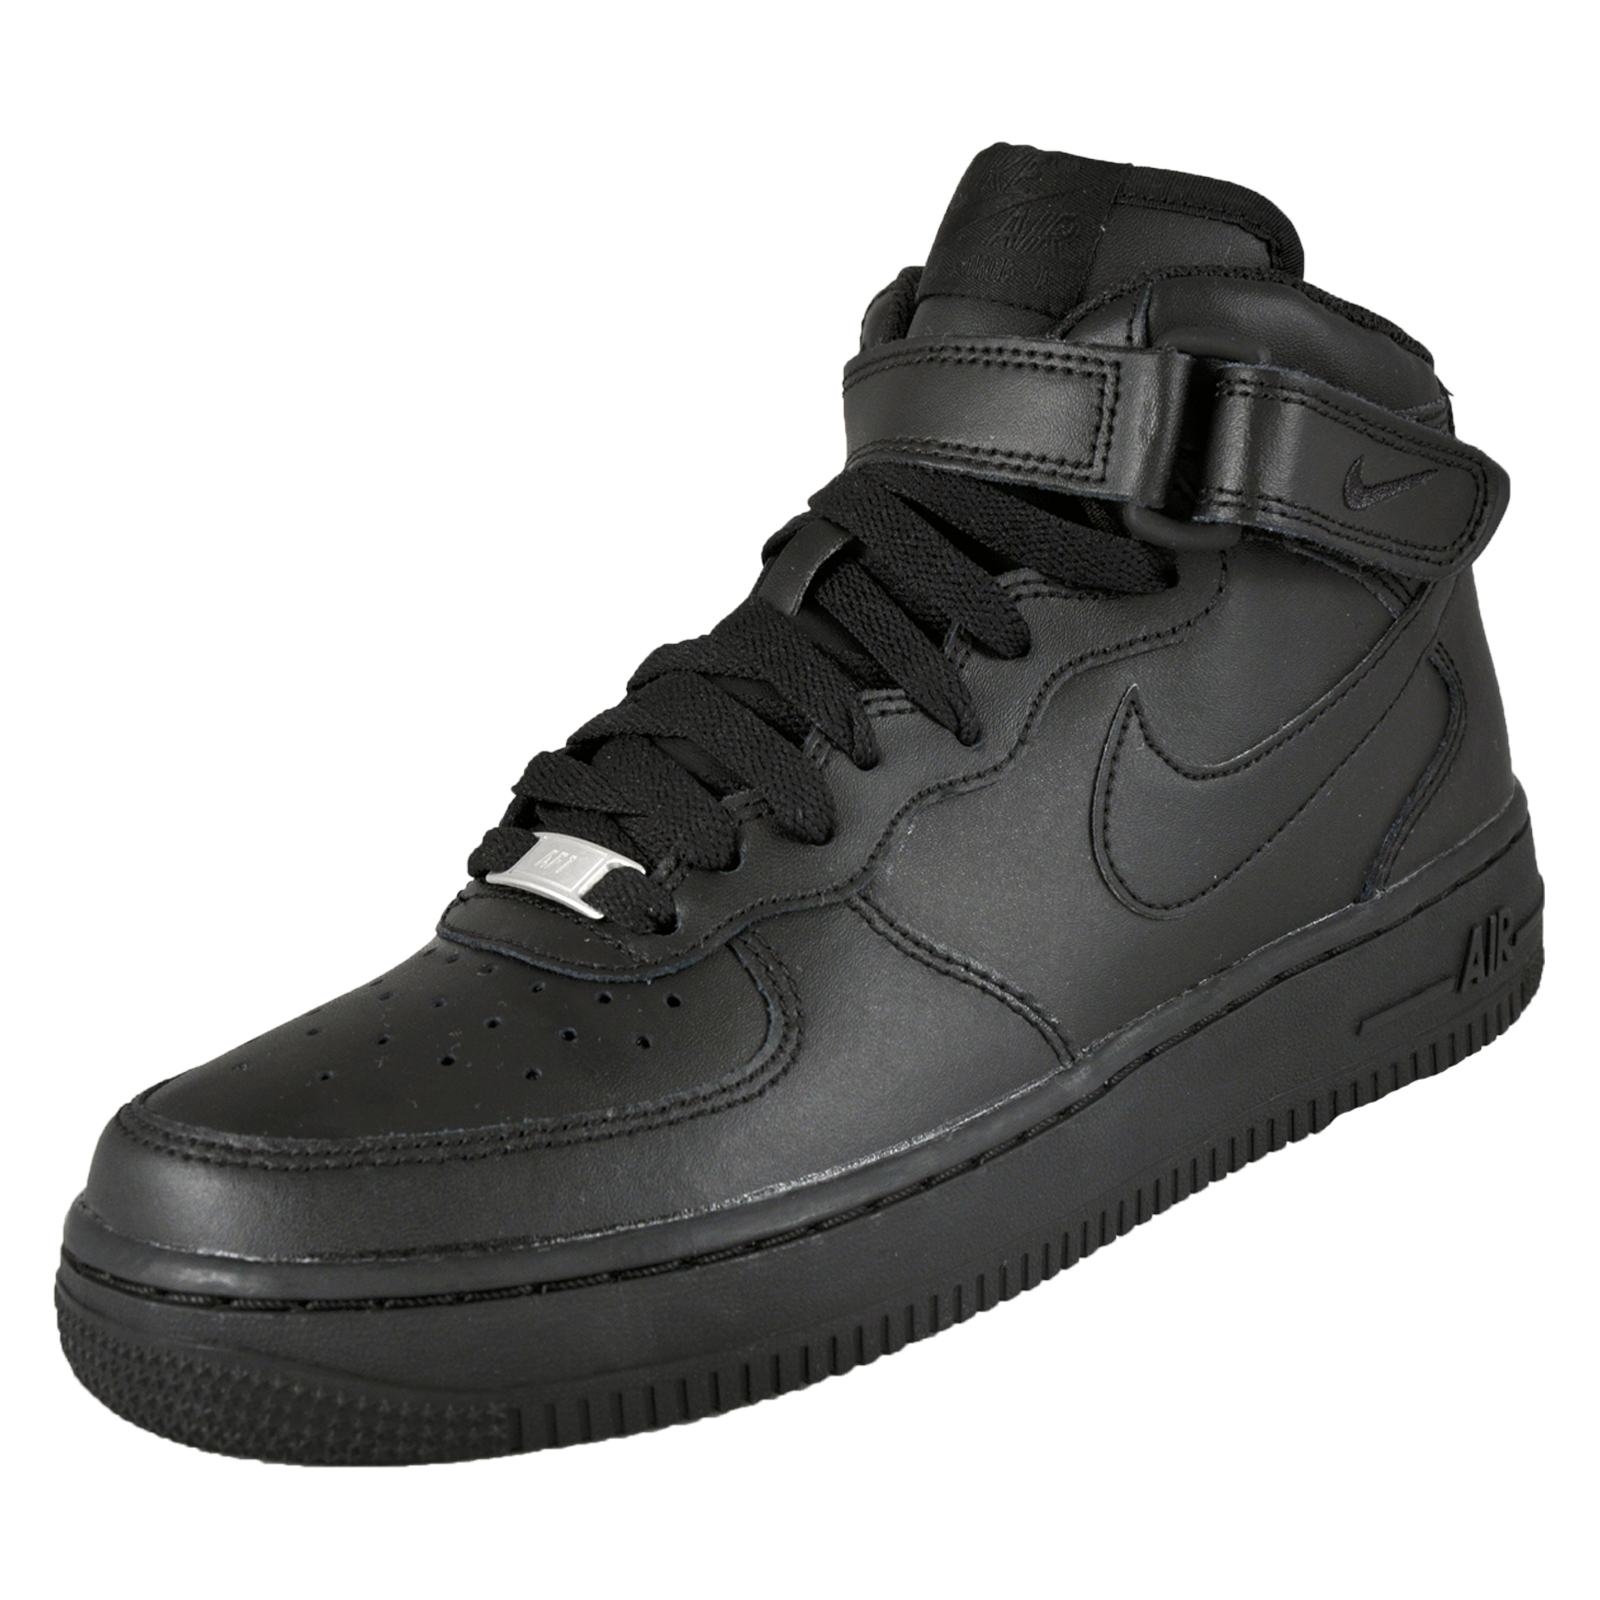 Nike Mens Air Force 1 Mid Classic Leather Trainers Black * AUTHENTIC * | eBay